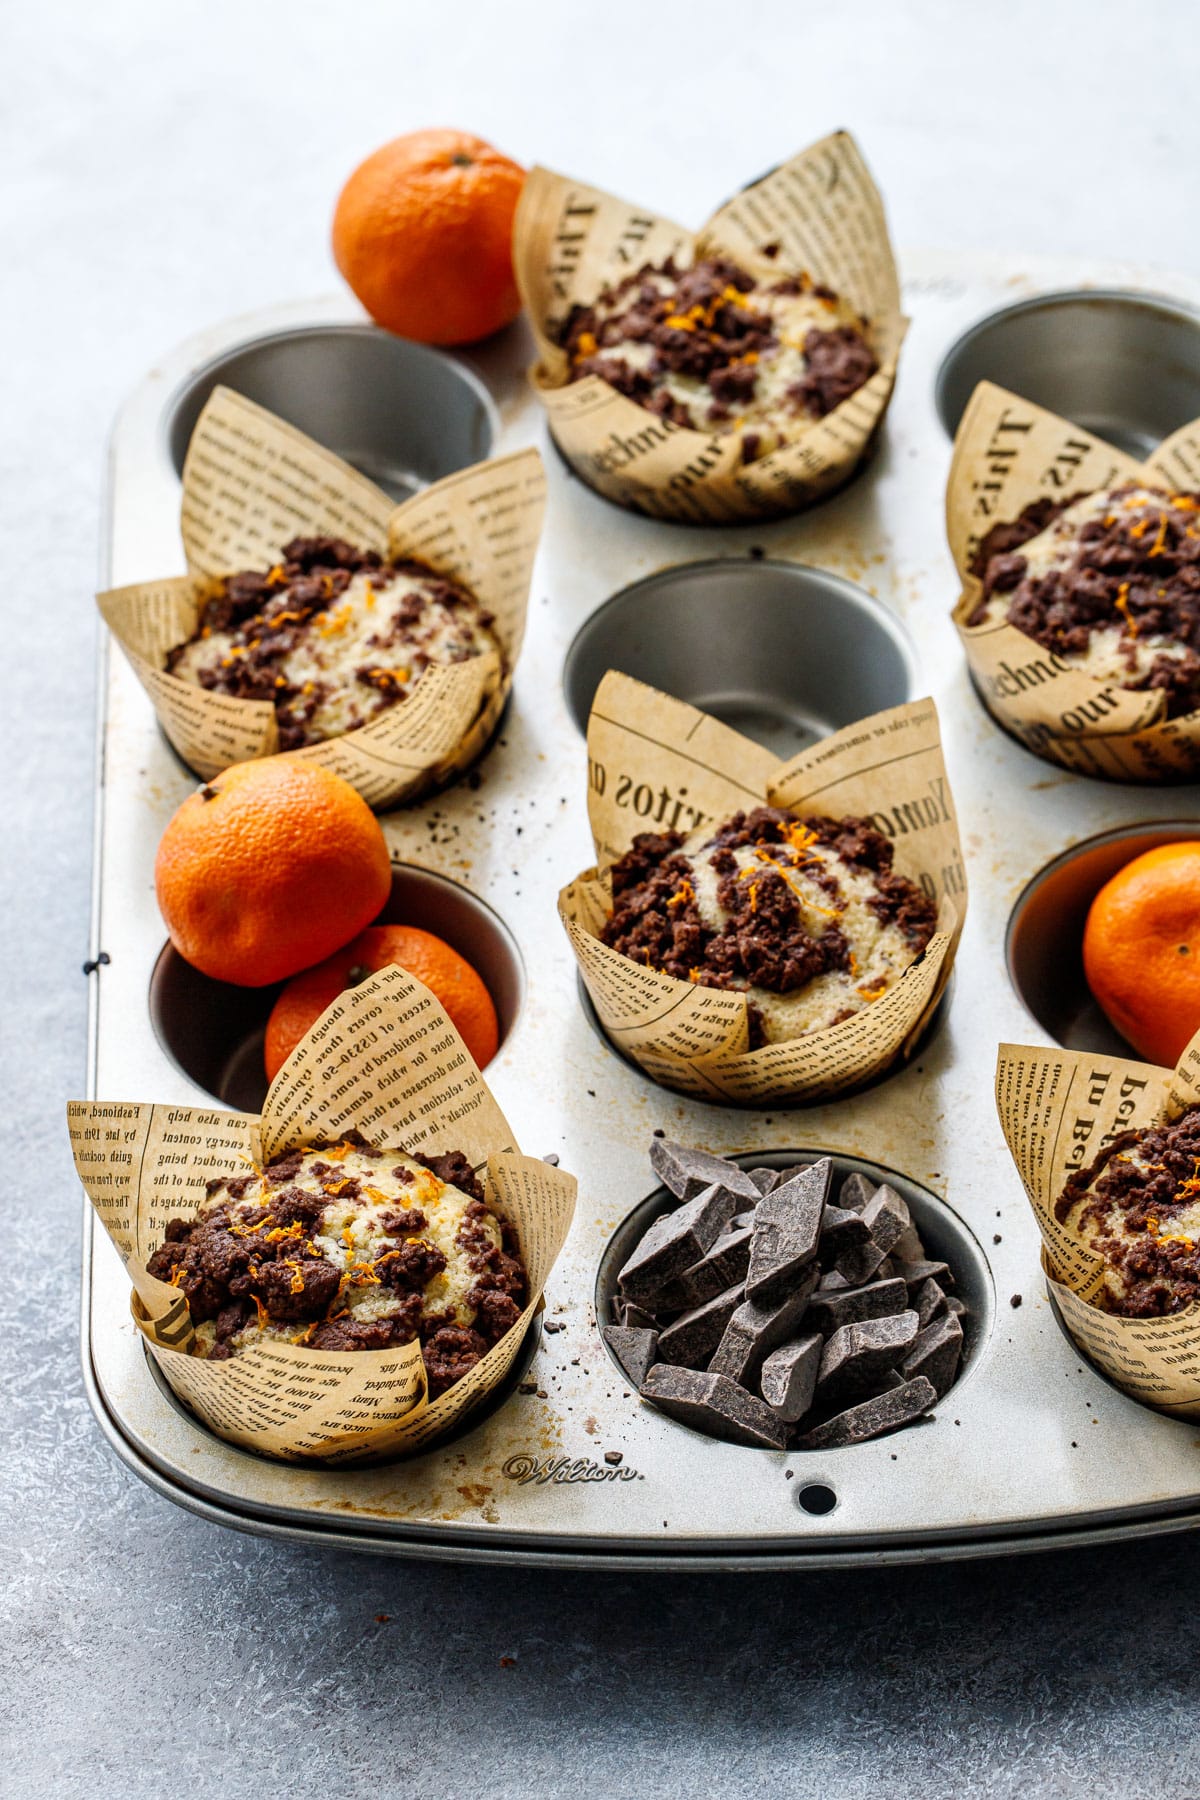 Muffin tin with alternating cups filled with baked muffins in tulip wrappers, some empty cups filled with chocolate chunks and mandarin oranges.